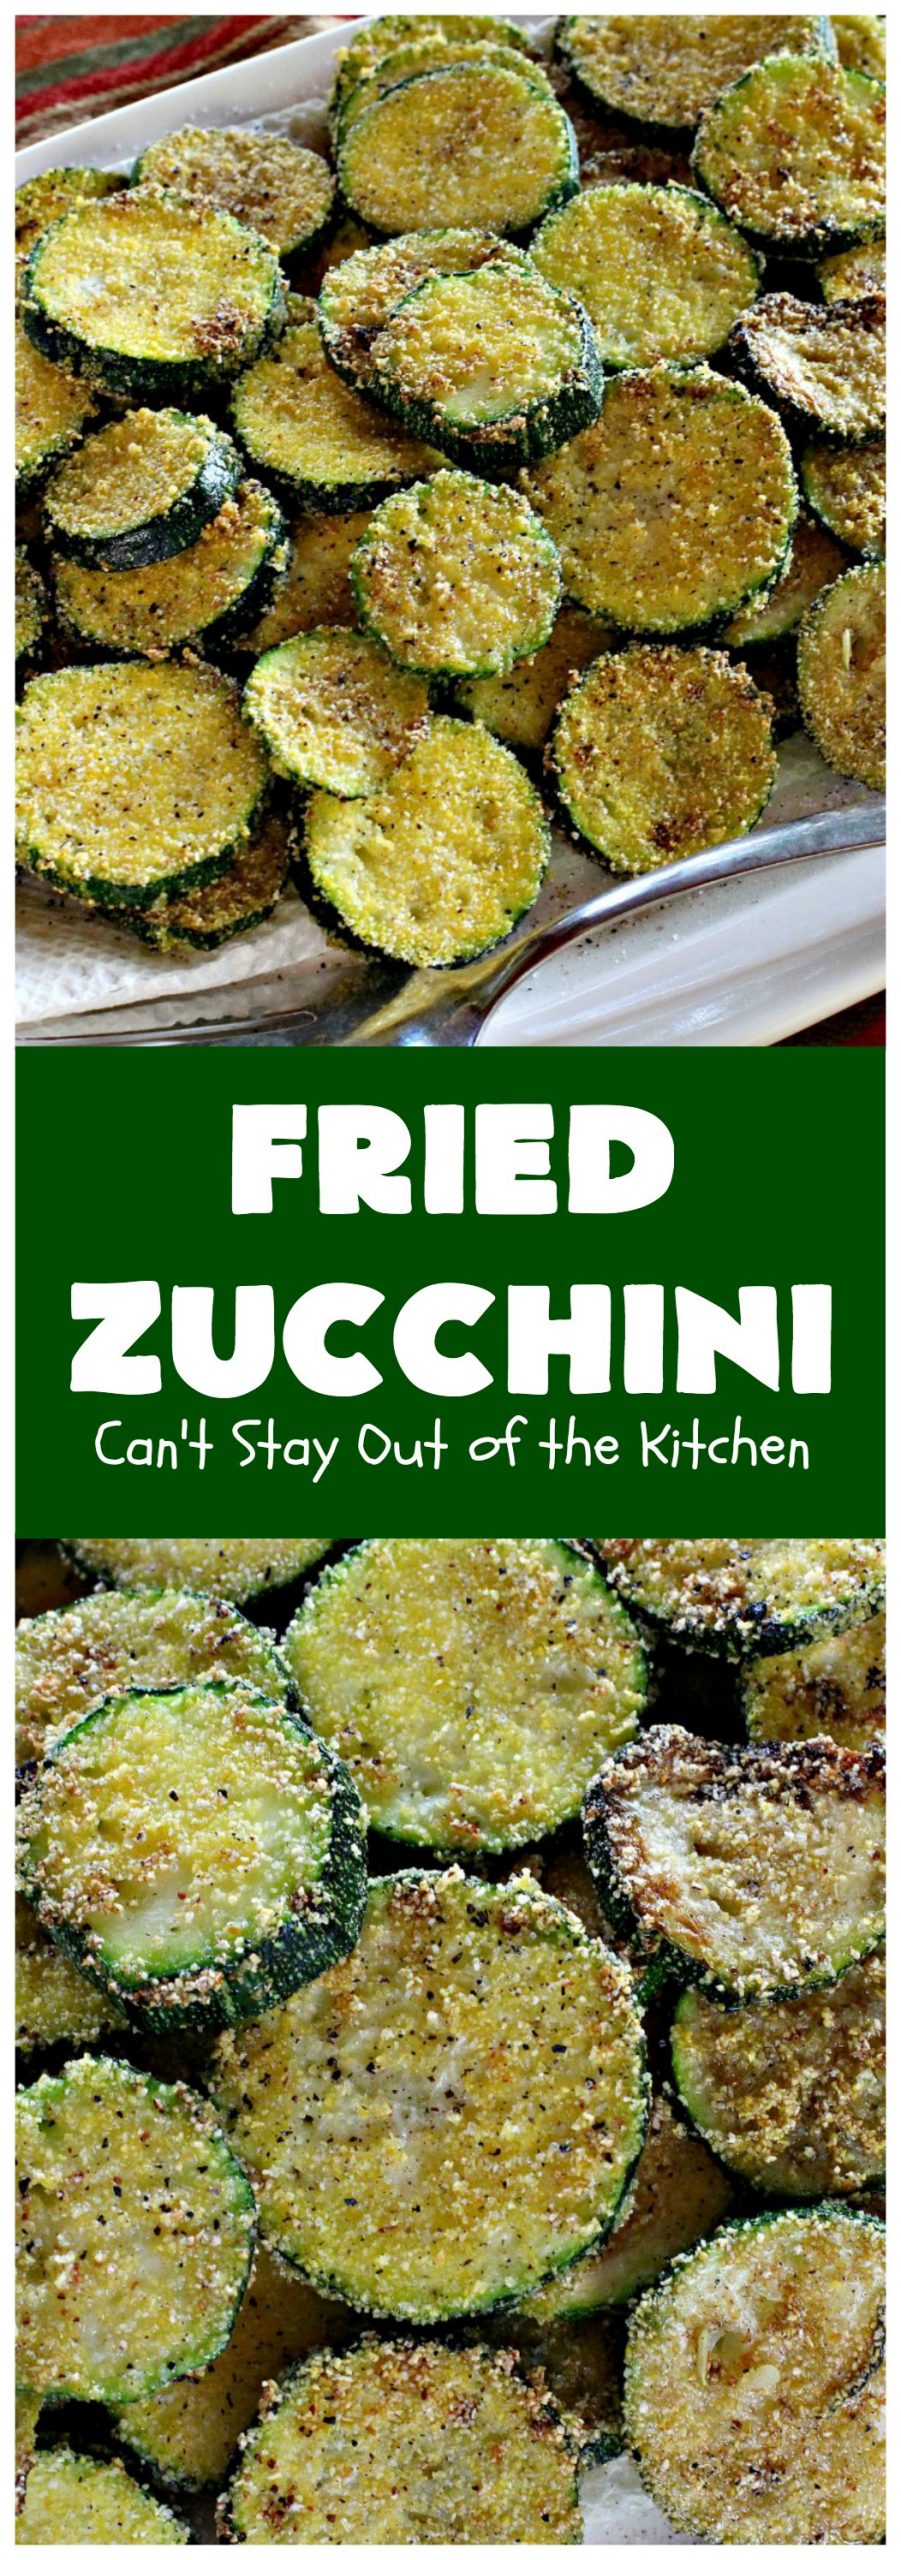 Fried Zucchini | Can't Stay Out of the Kitchen